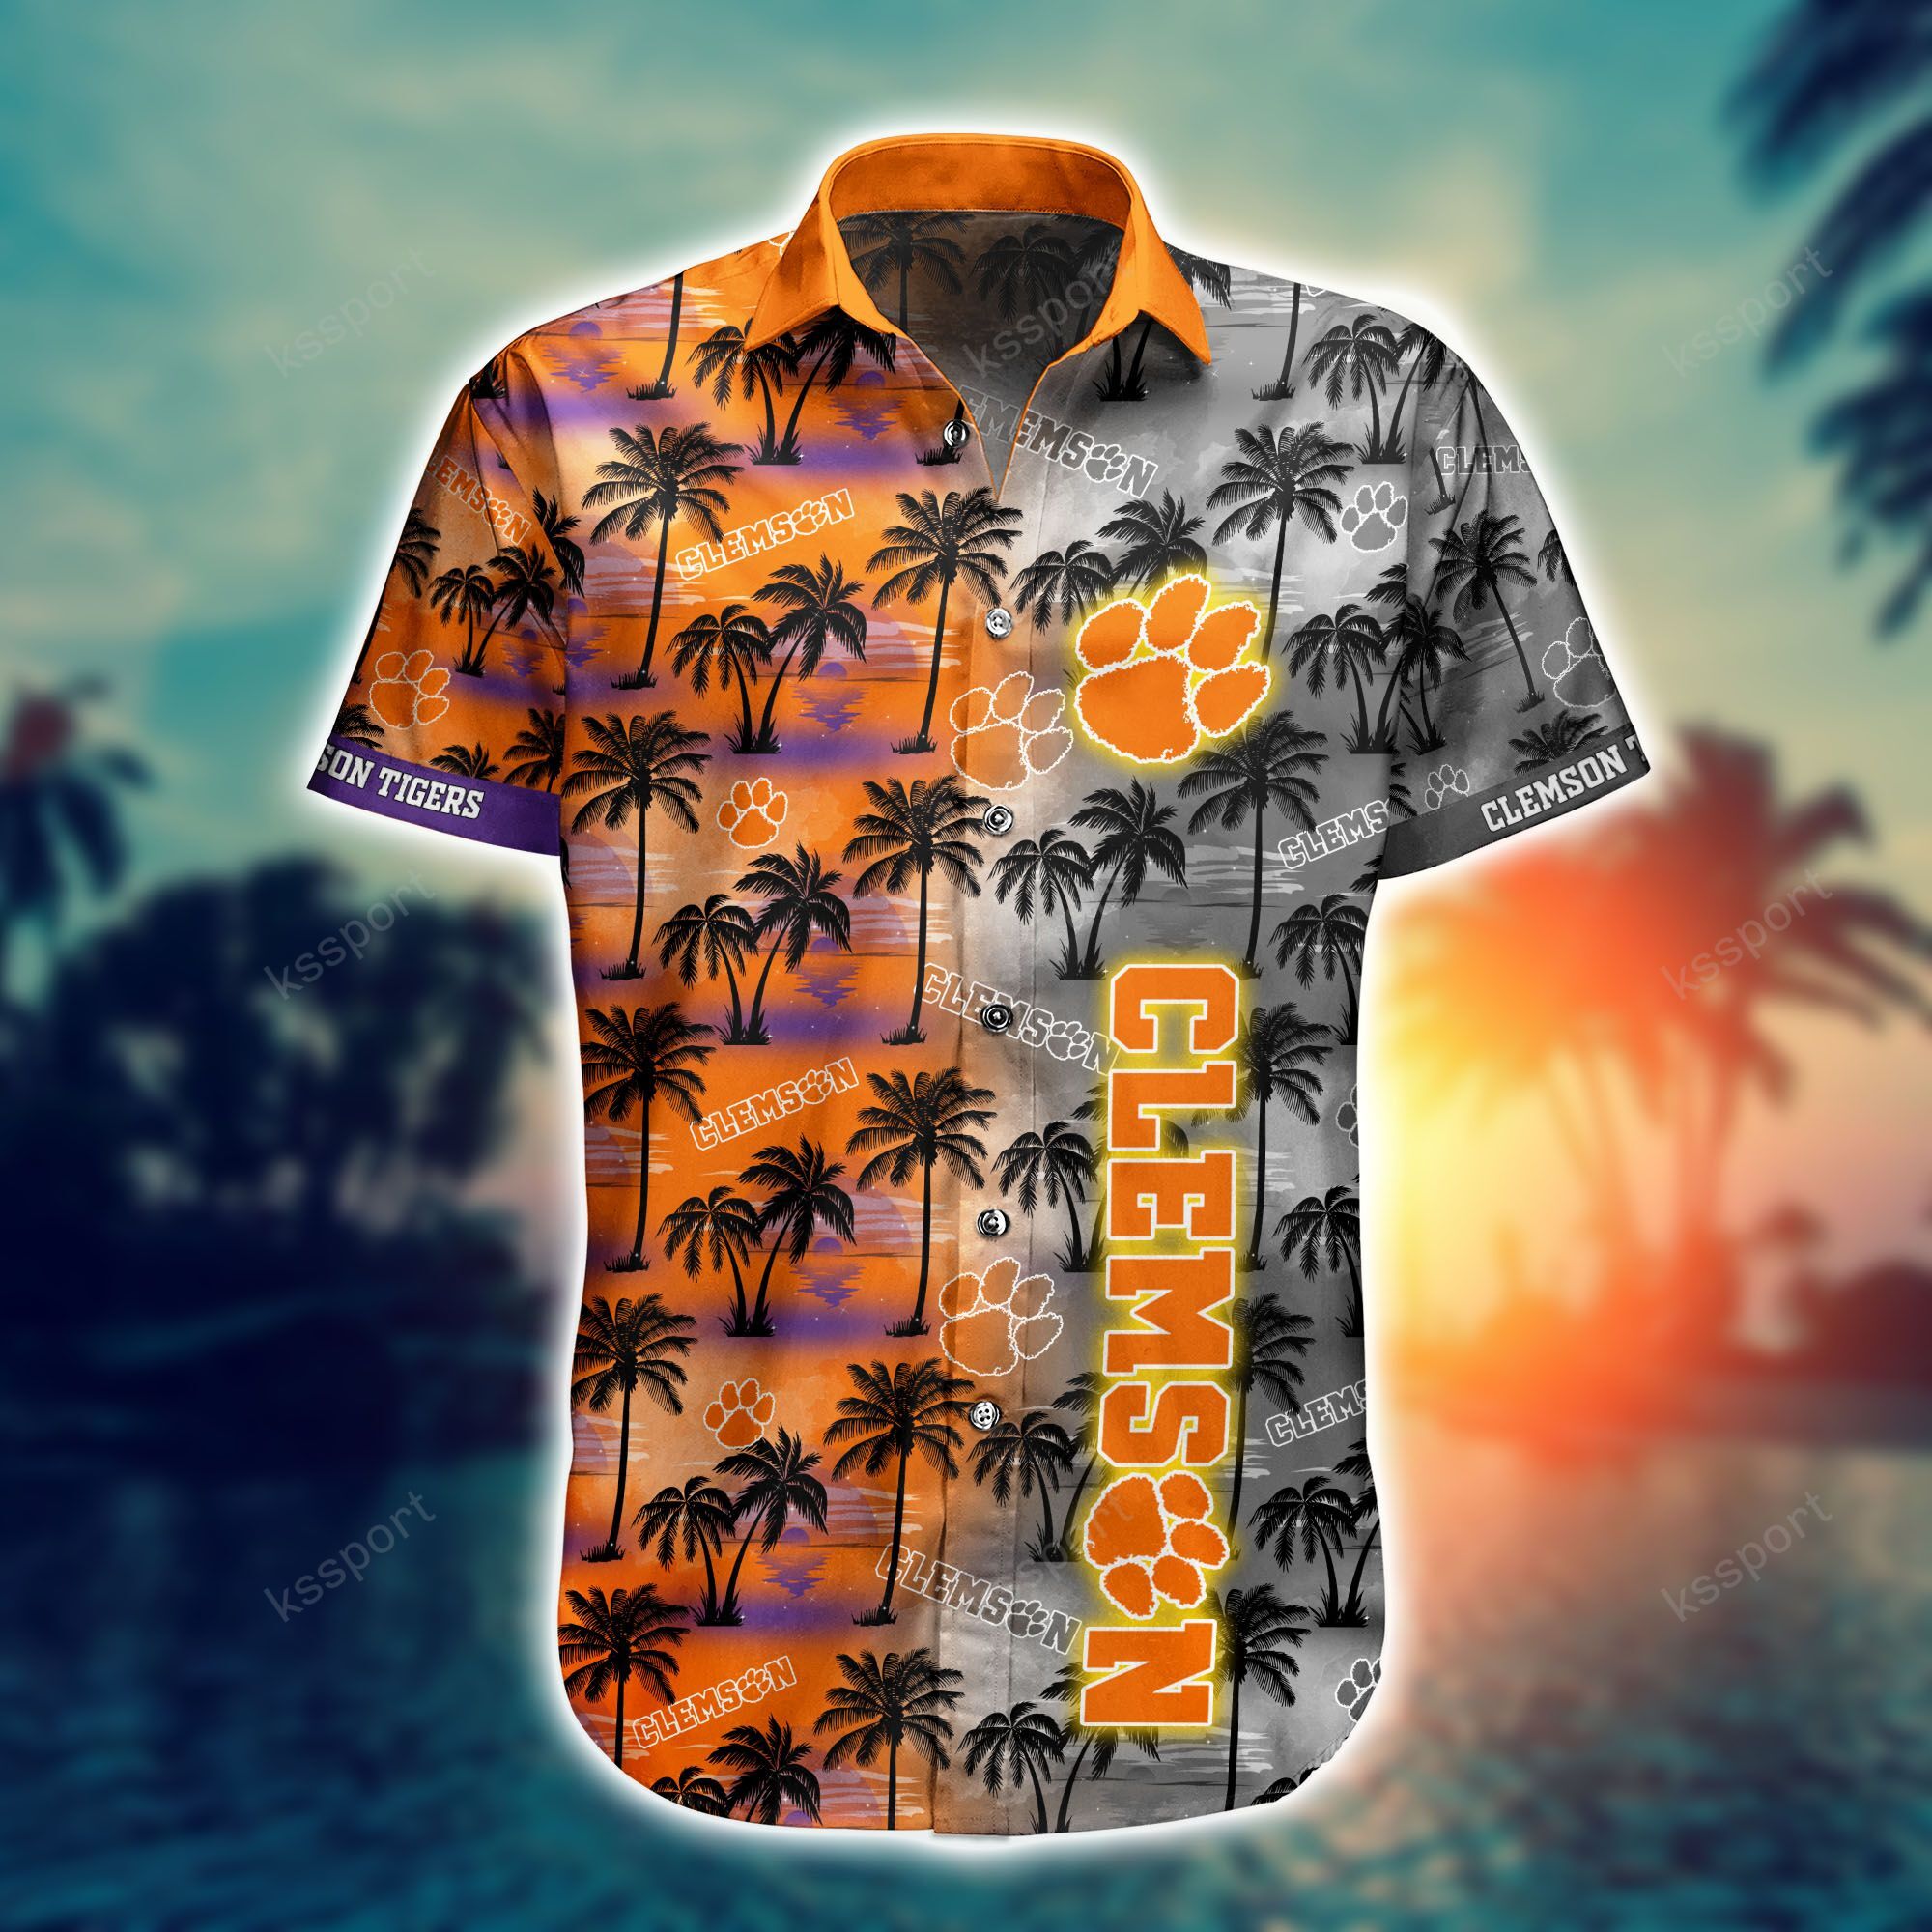 Top cool Hawaiian shirt 2022 - Make sure you get yours today before they run out! 129